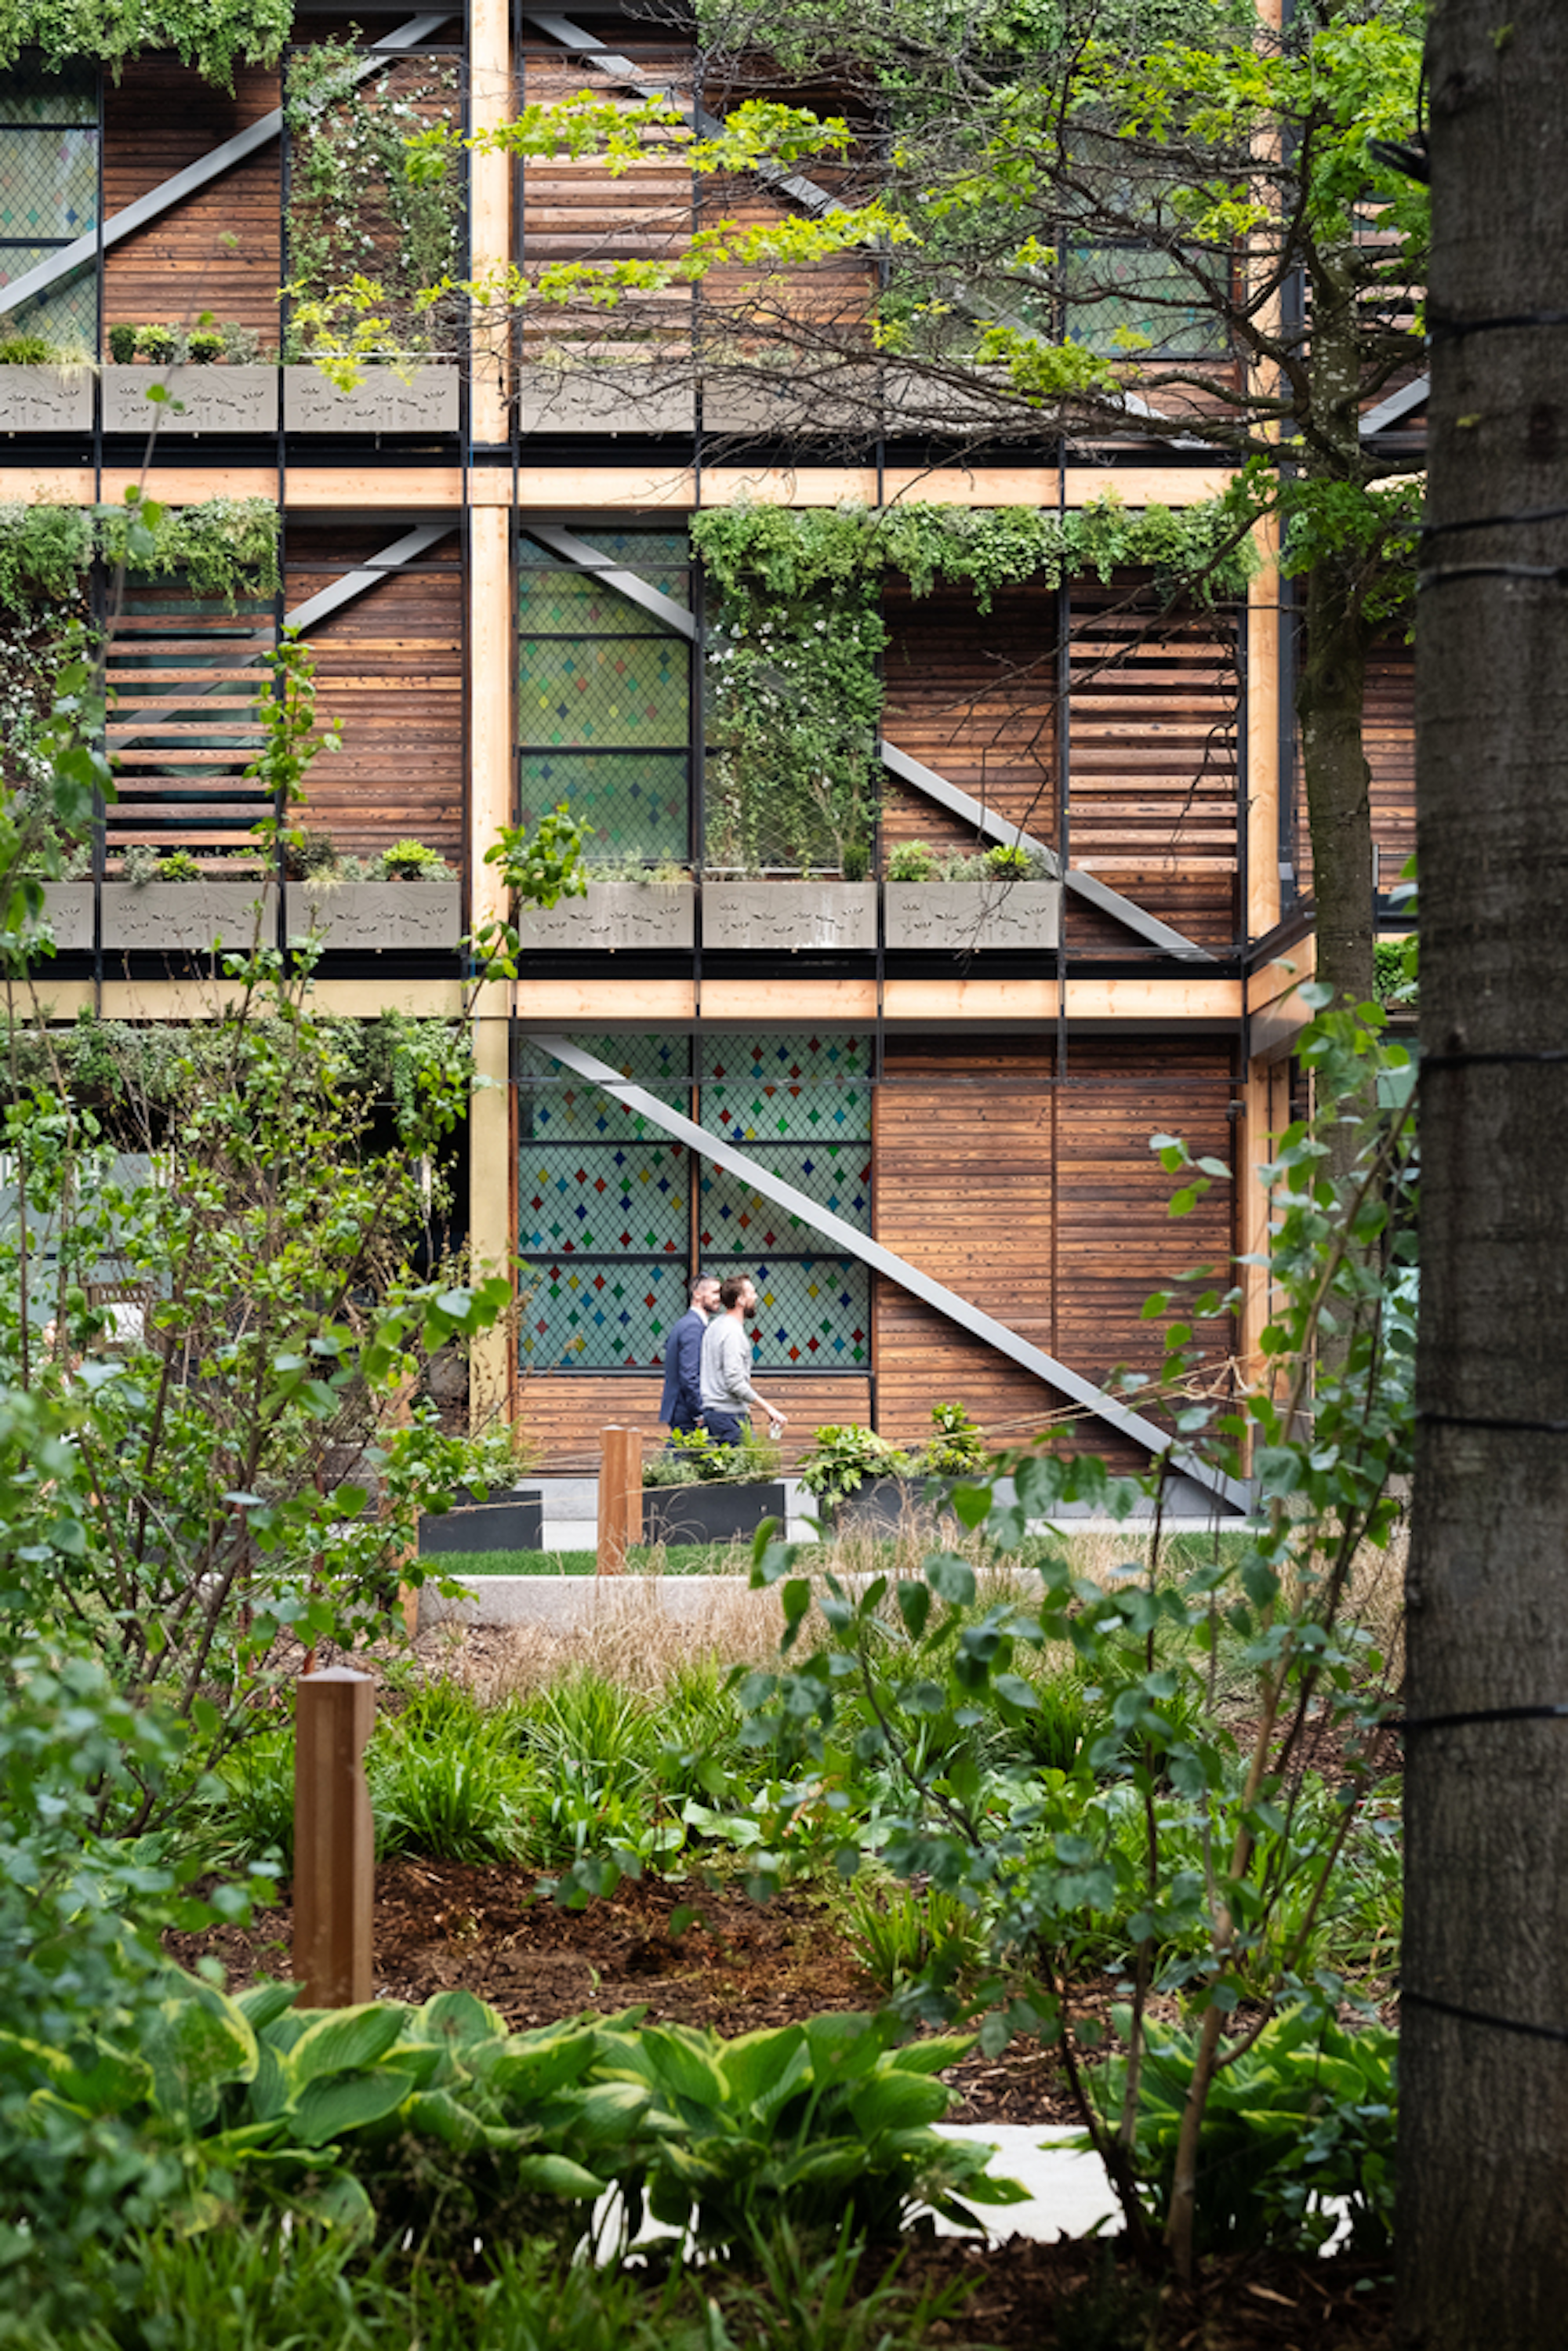 landscaped gardens looking onto sustainable wood building with planters